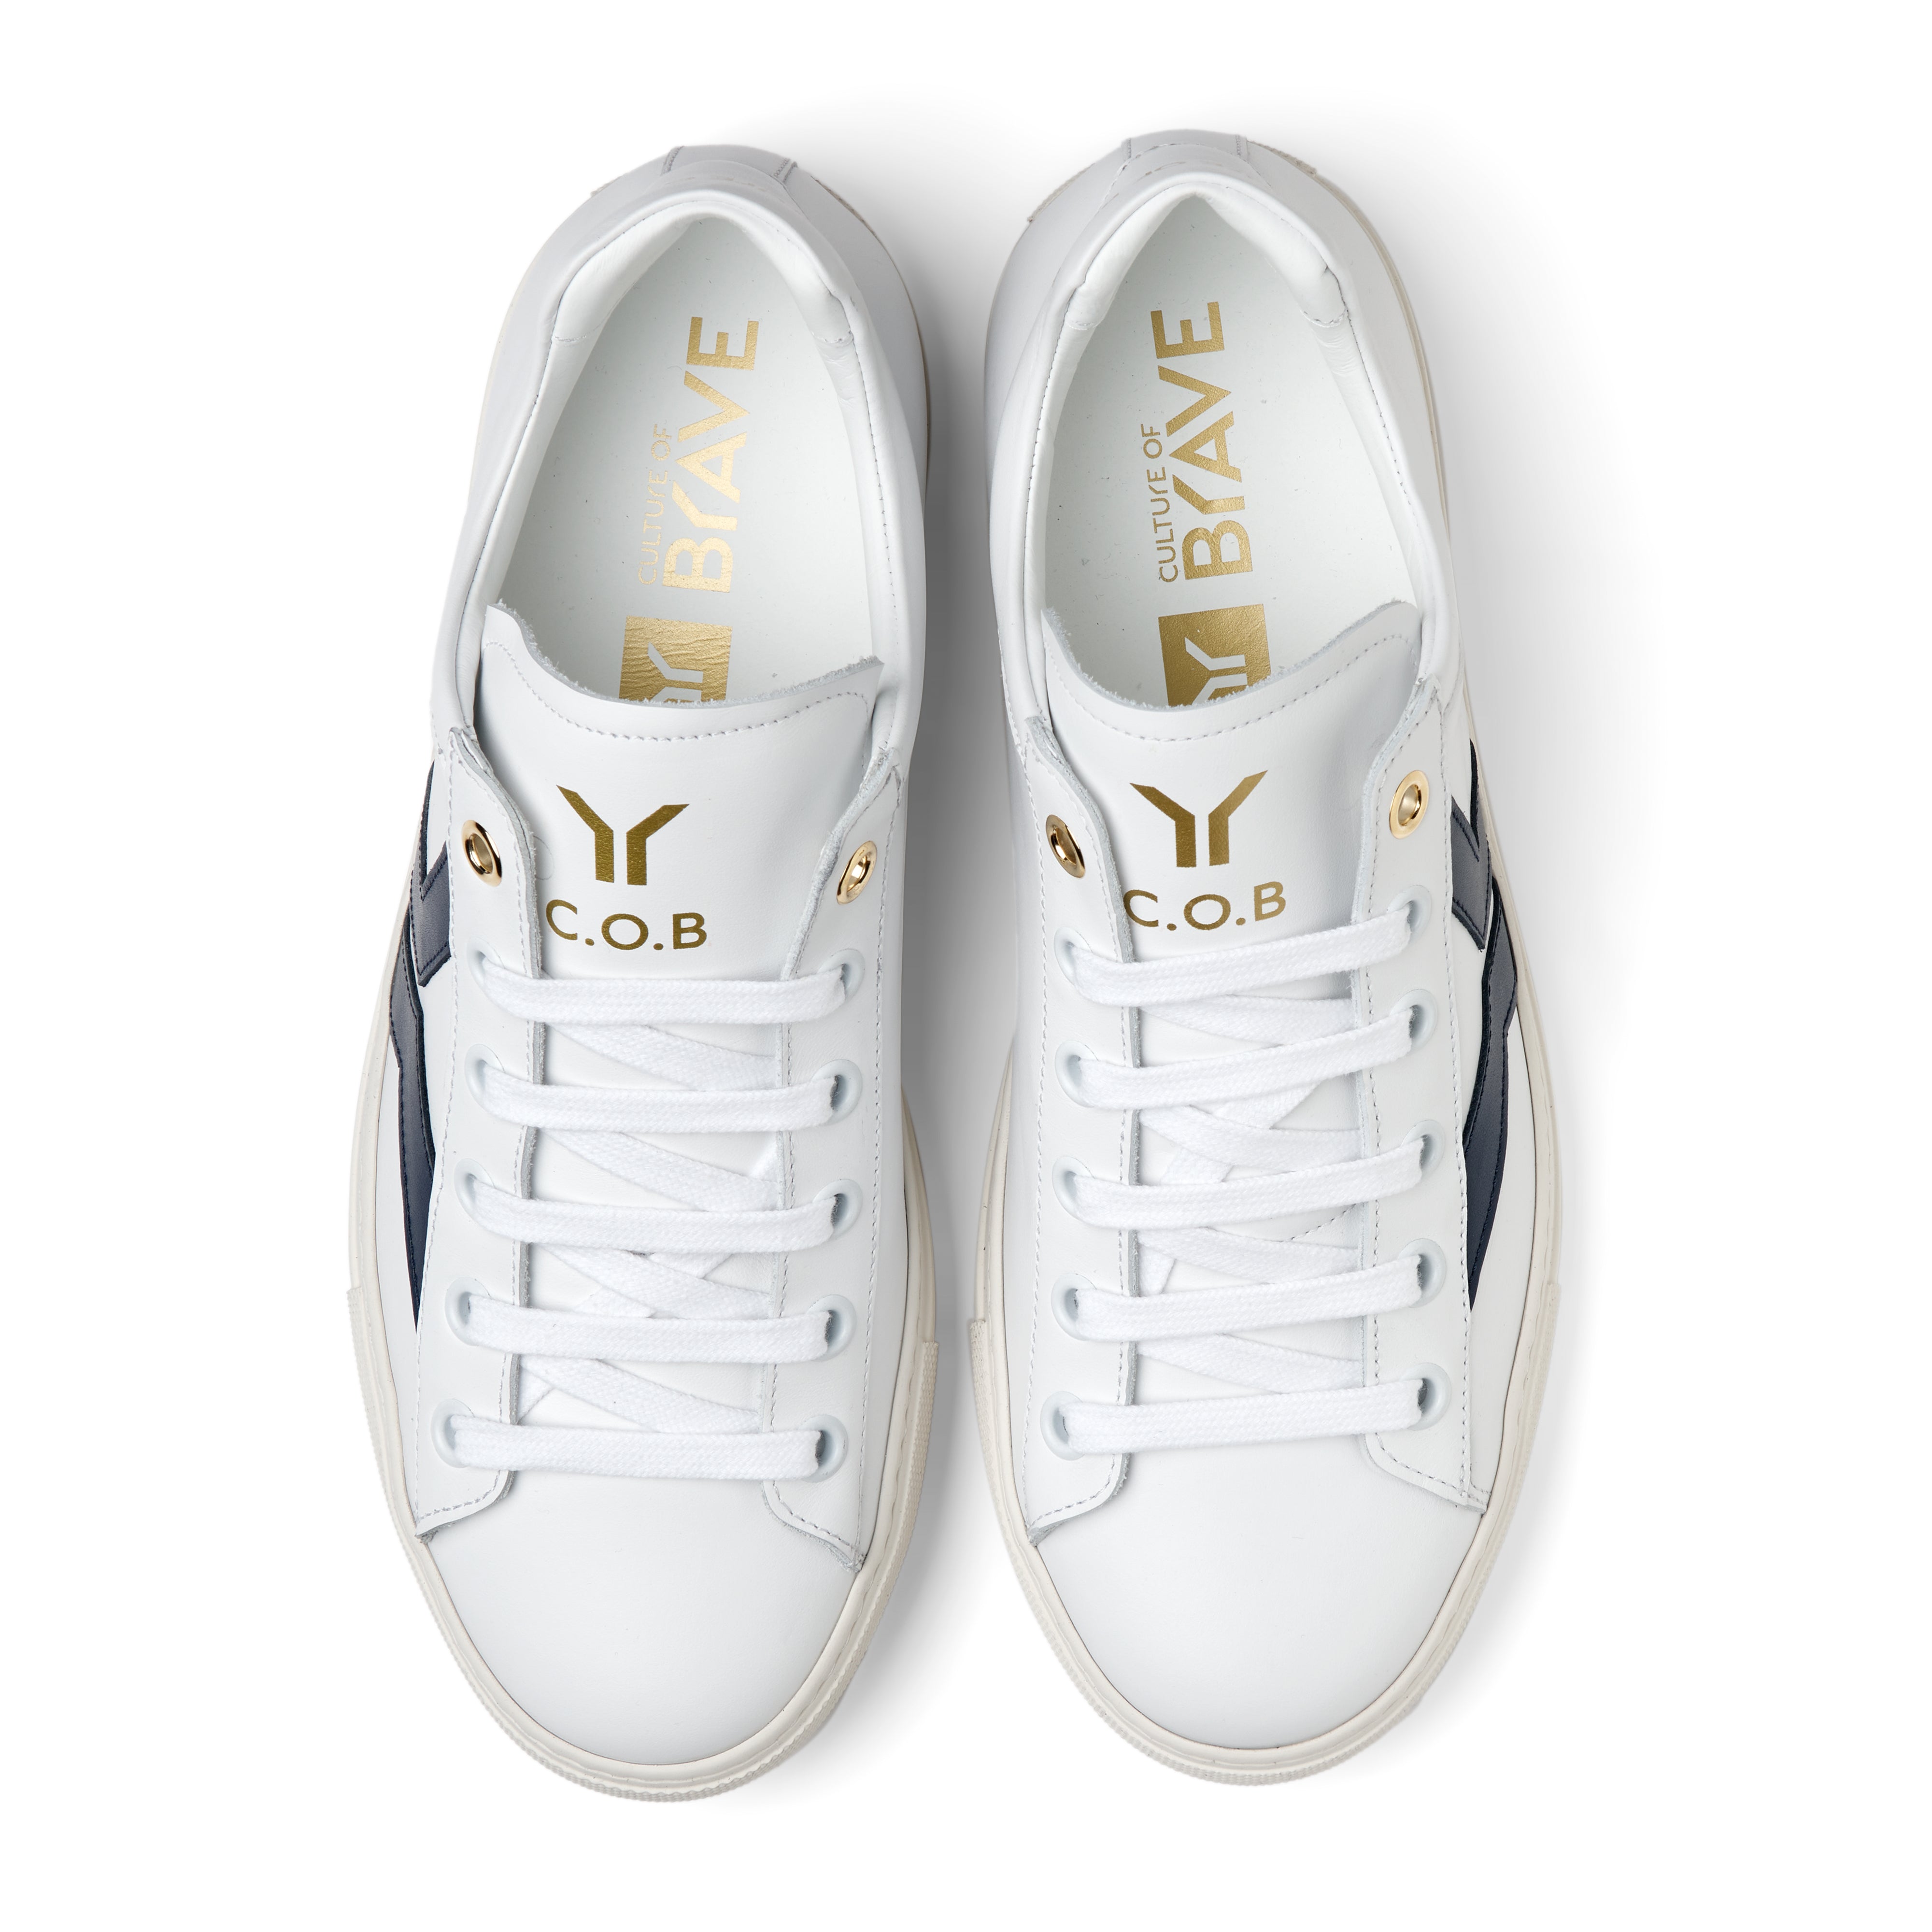 Courage S29 Women White leather navy wing low cut